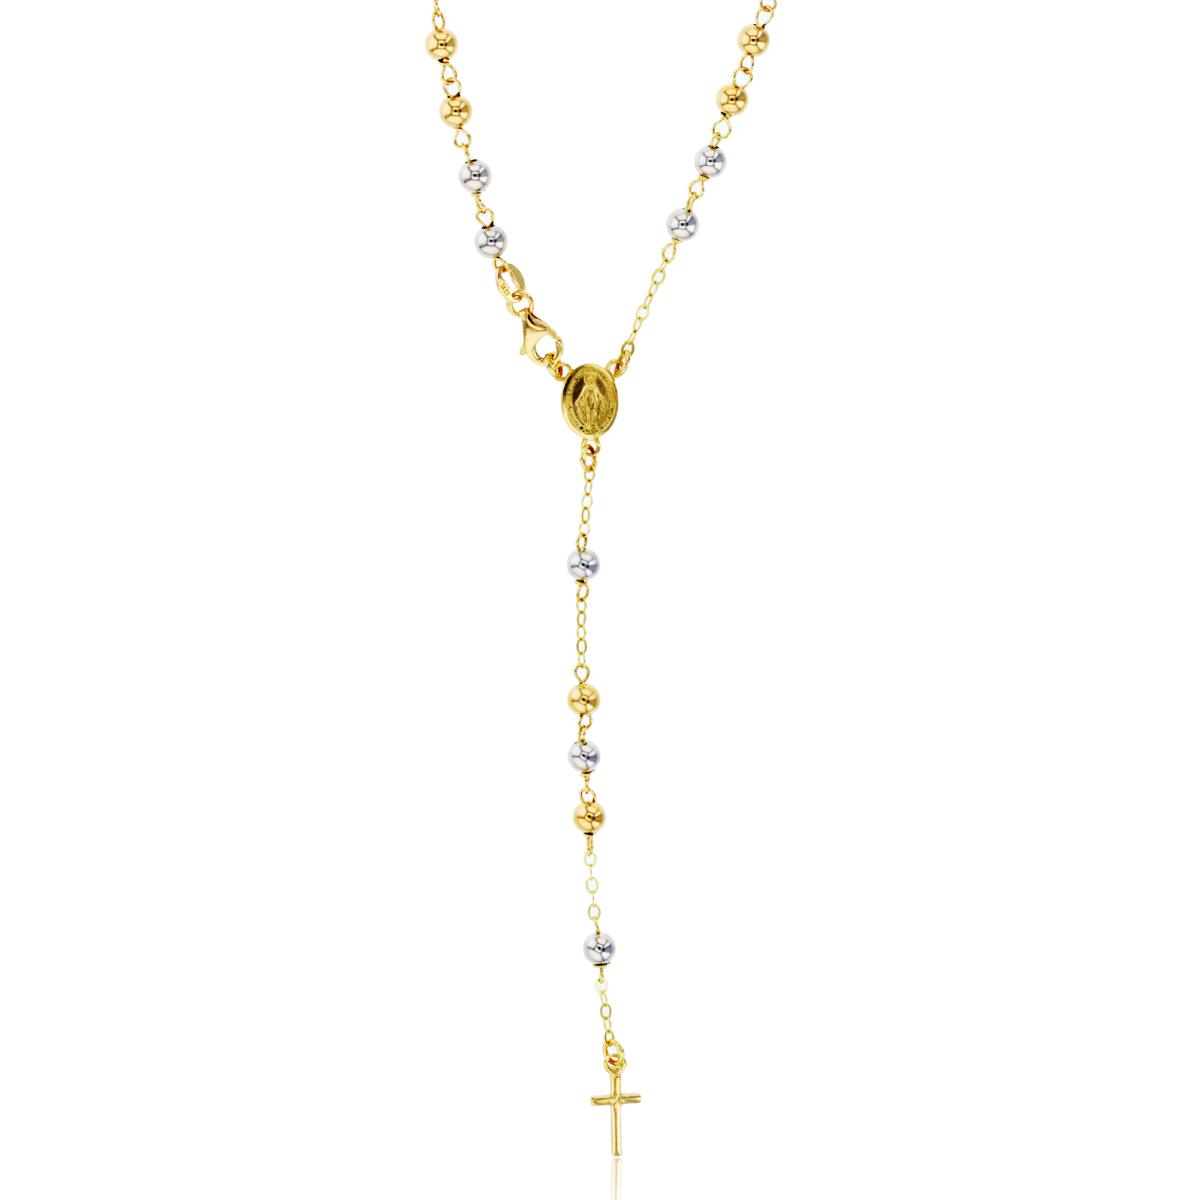 10K Two-Tone Gold 4mm Beads Rosary 24" Necklace